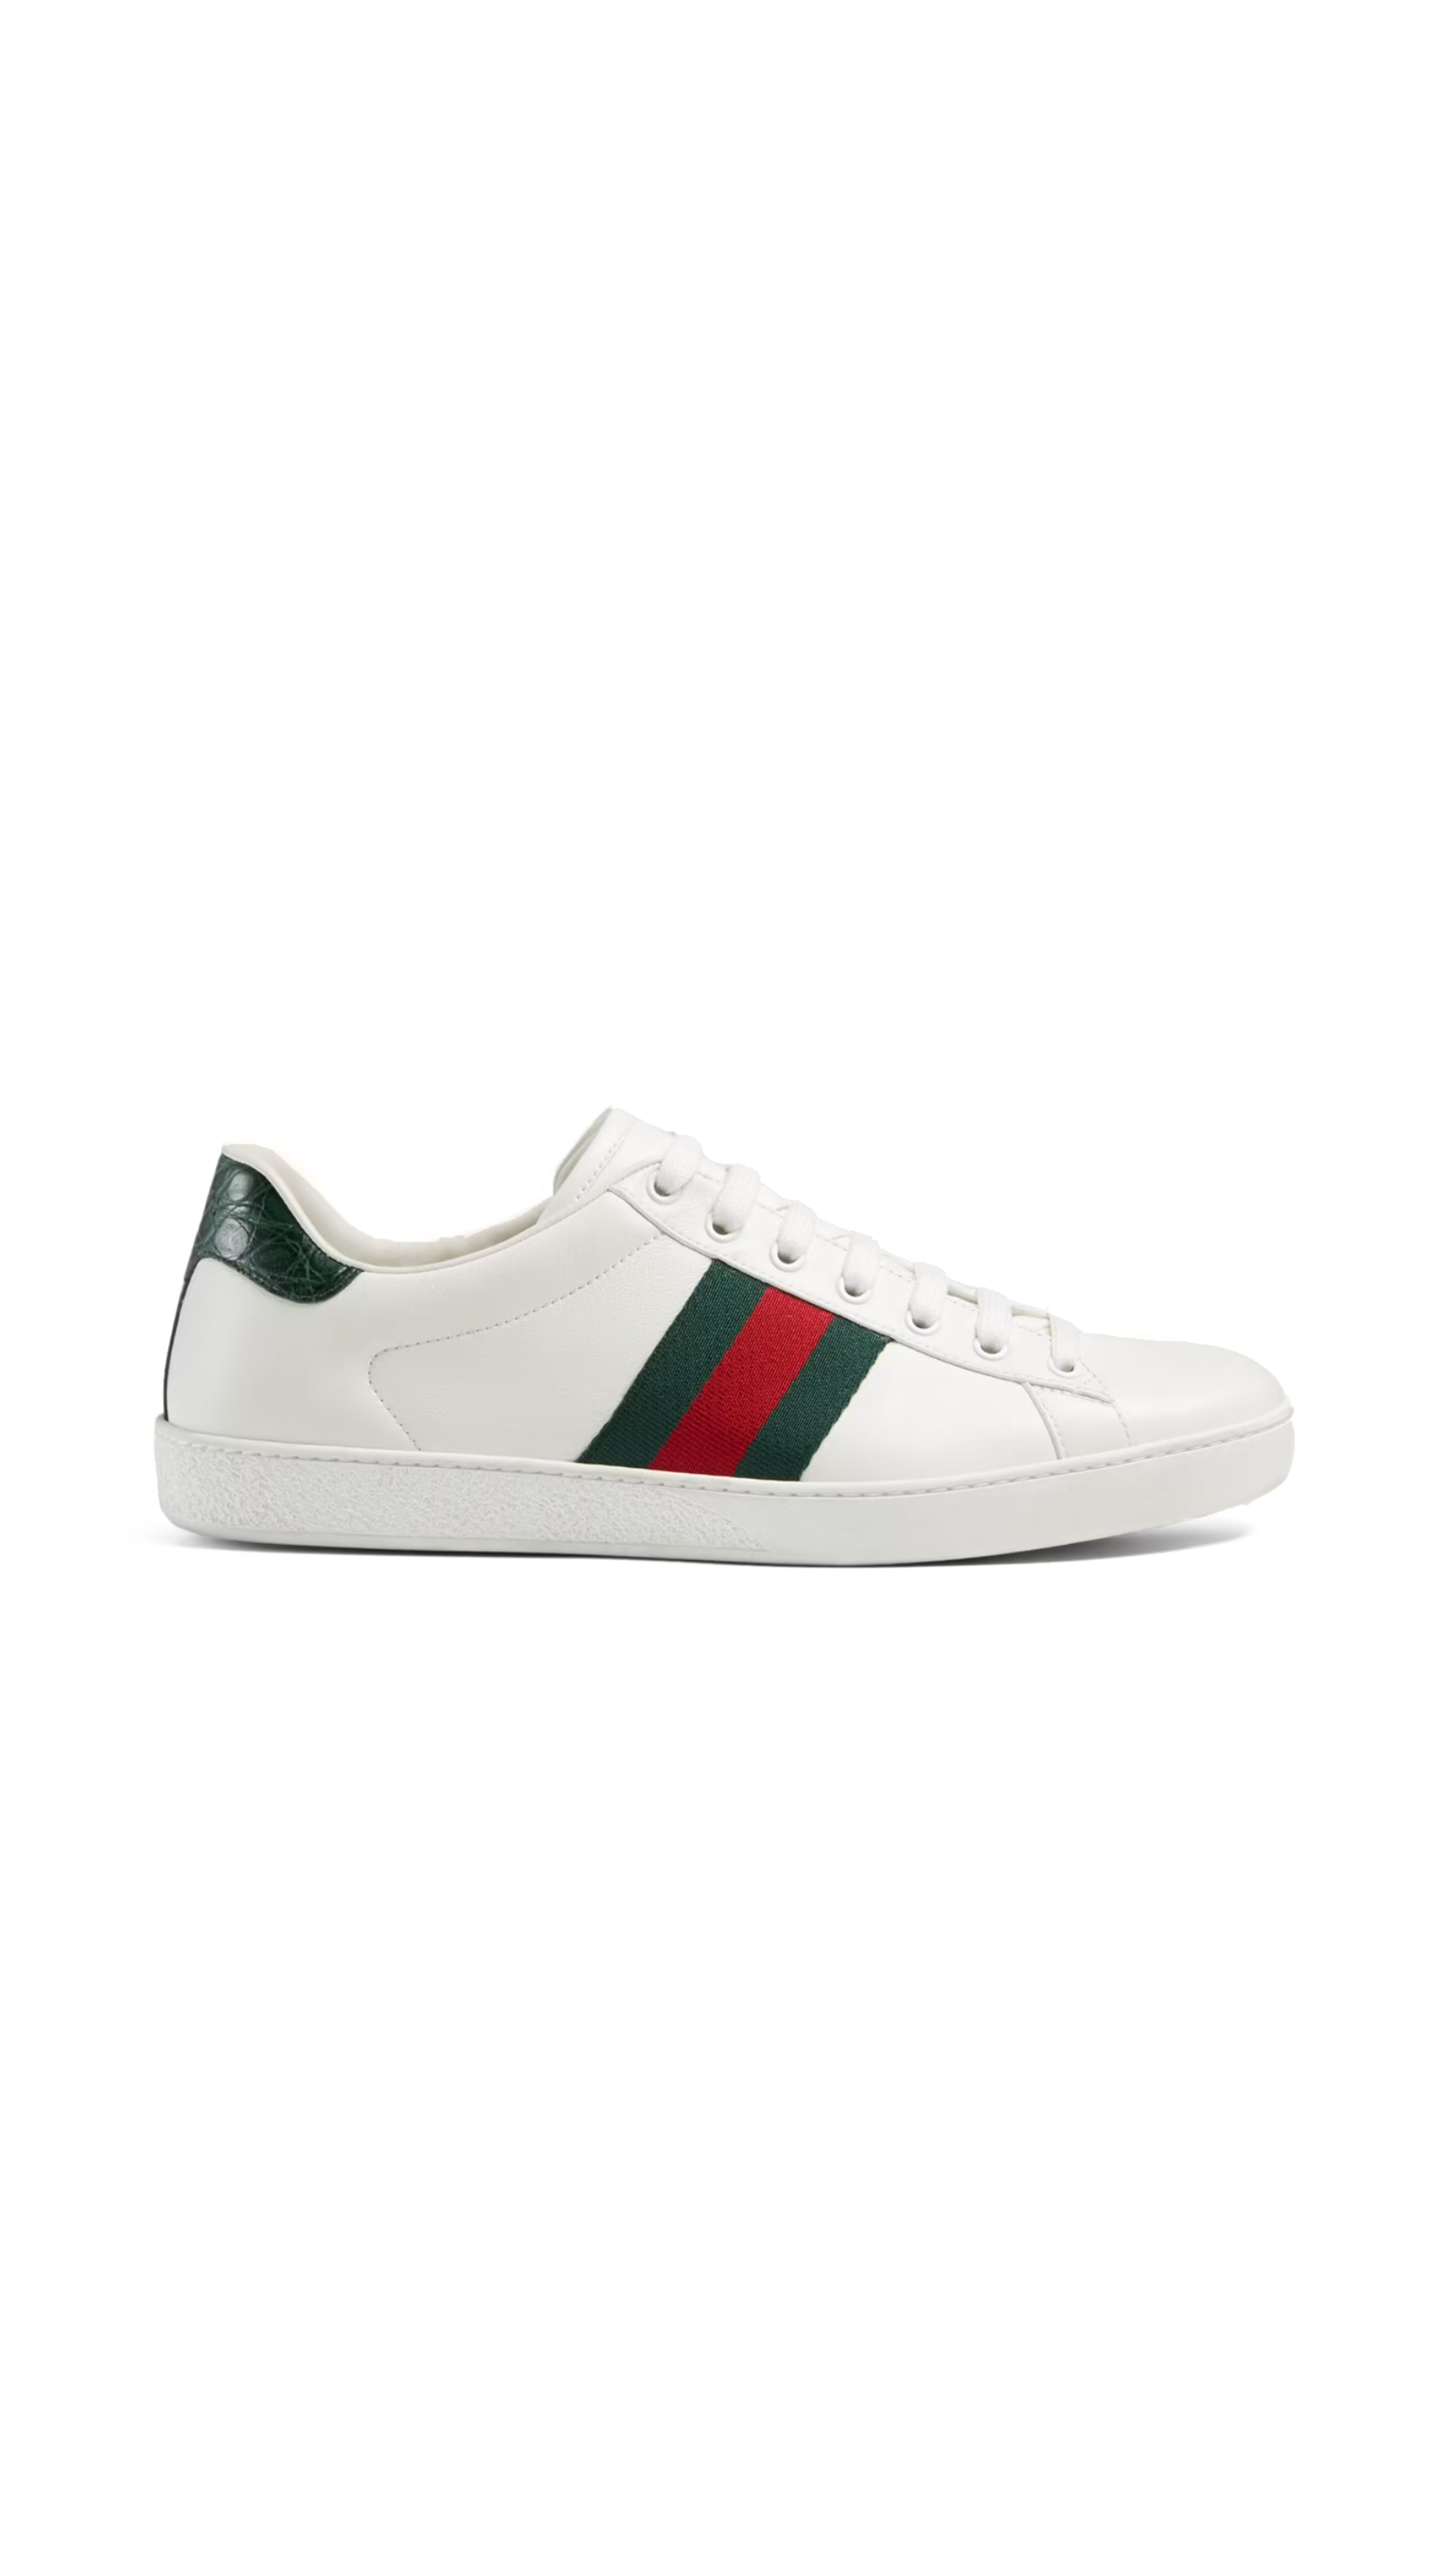 Ace Leather Sneakers - White/Green